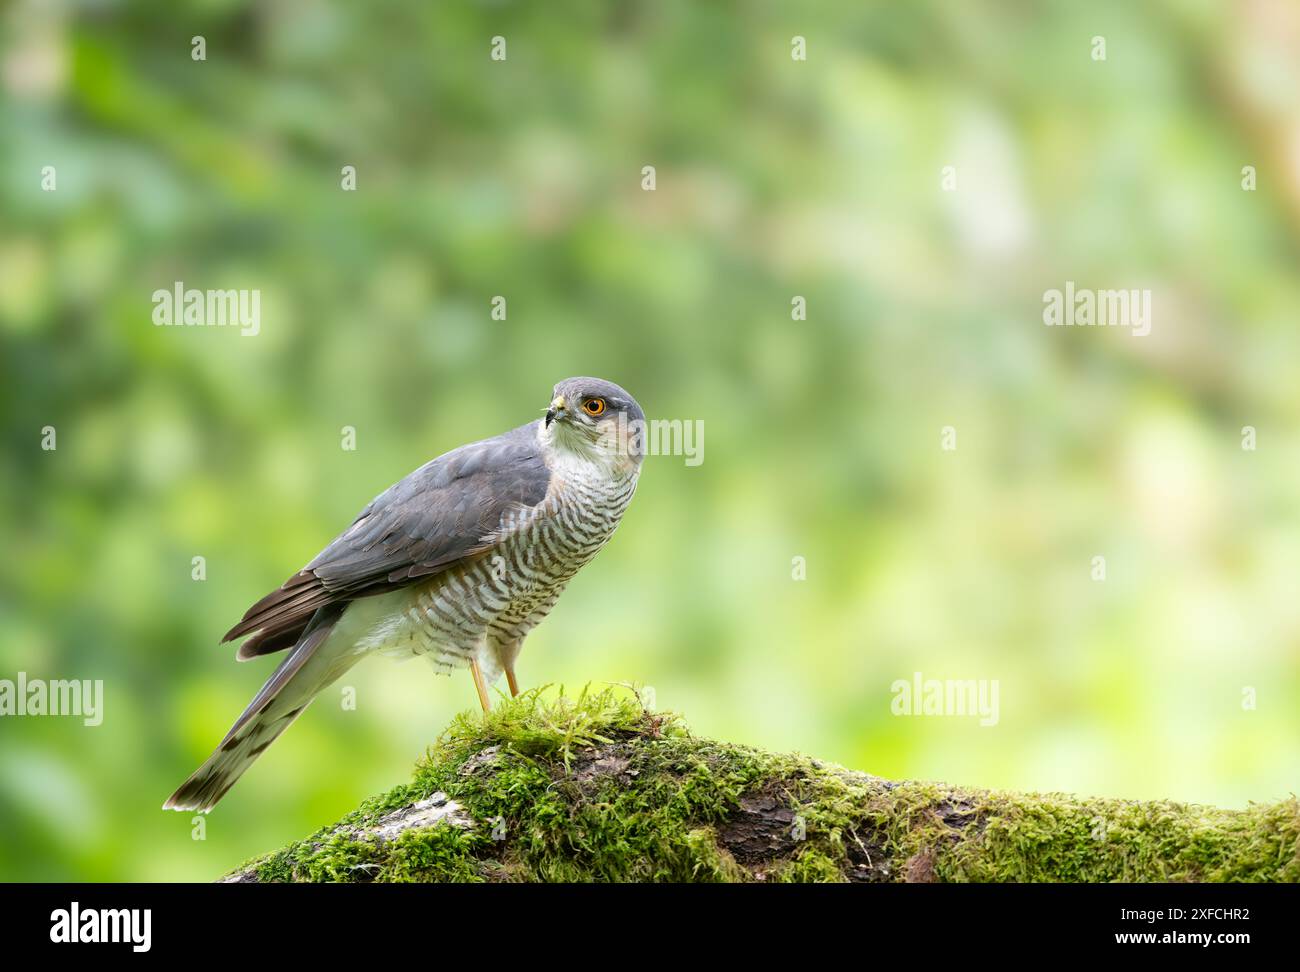 Eurasian Sparrowhawk,Accipiter nisus, perched on a moss covered branch Stock Photo